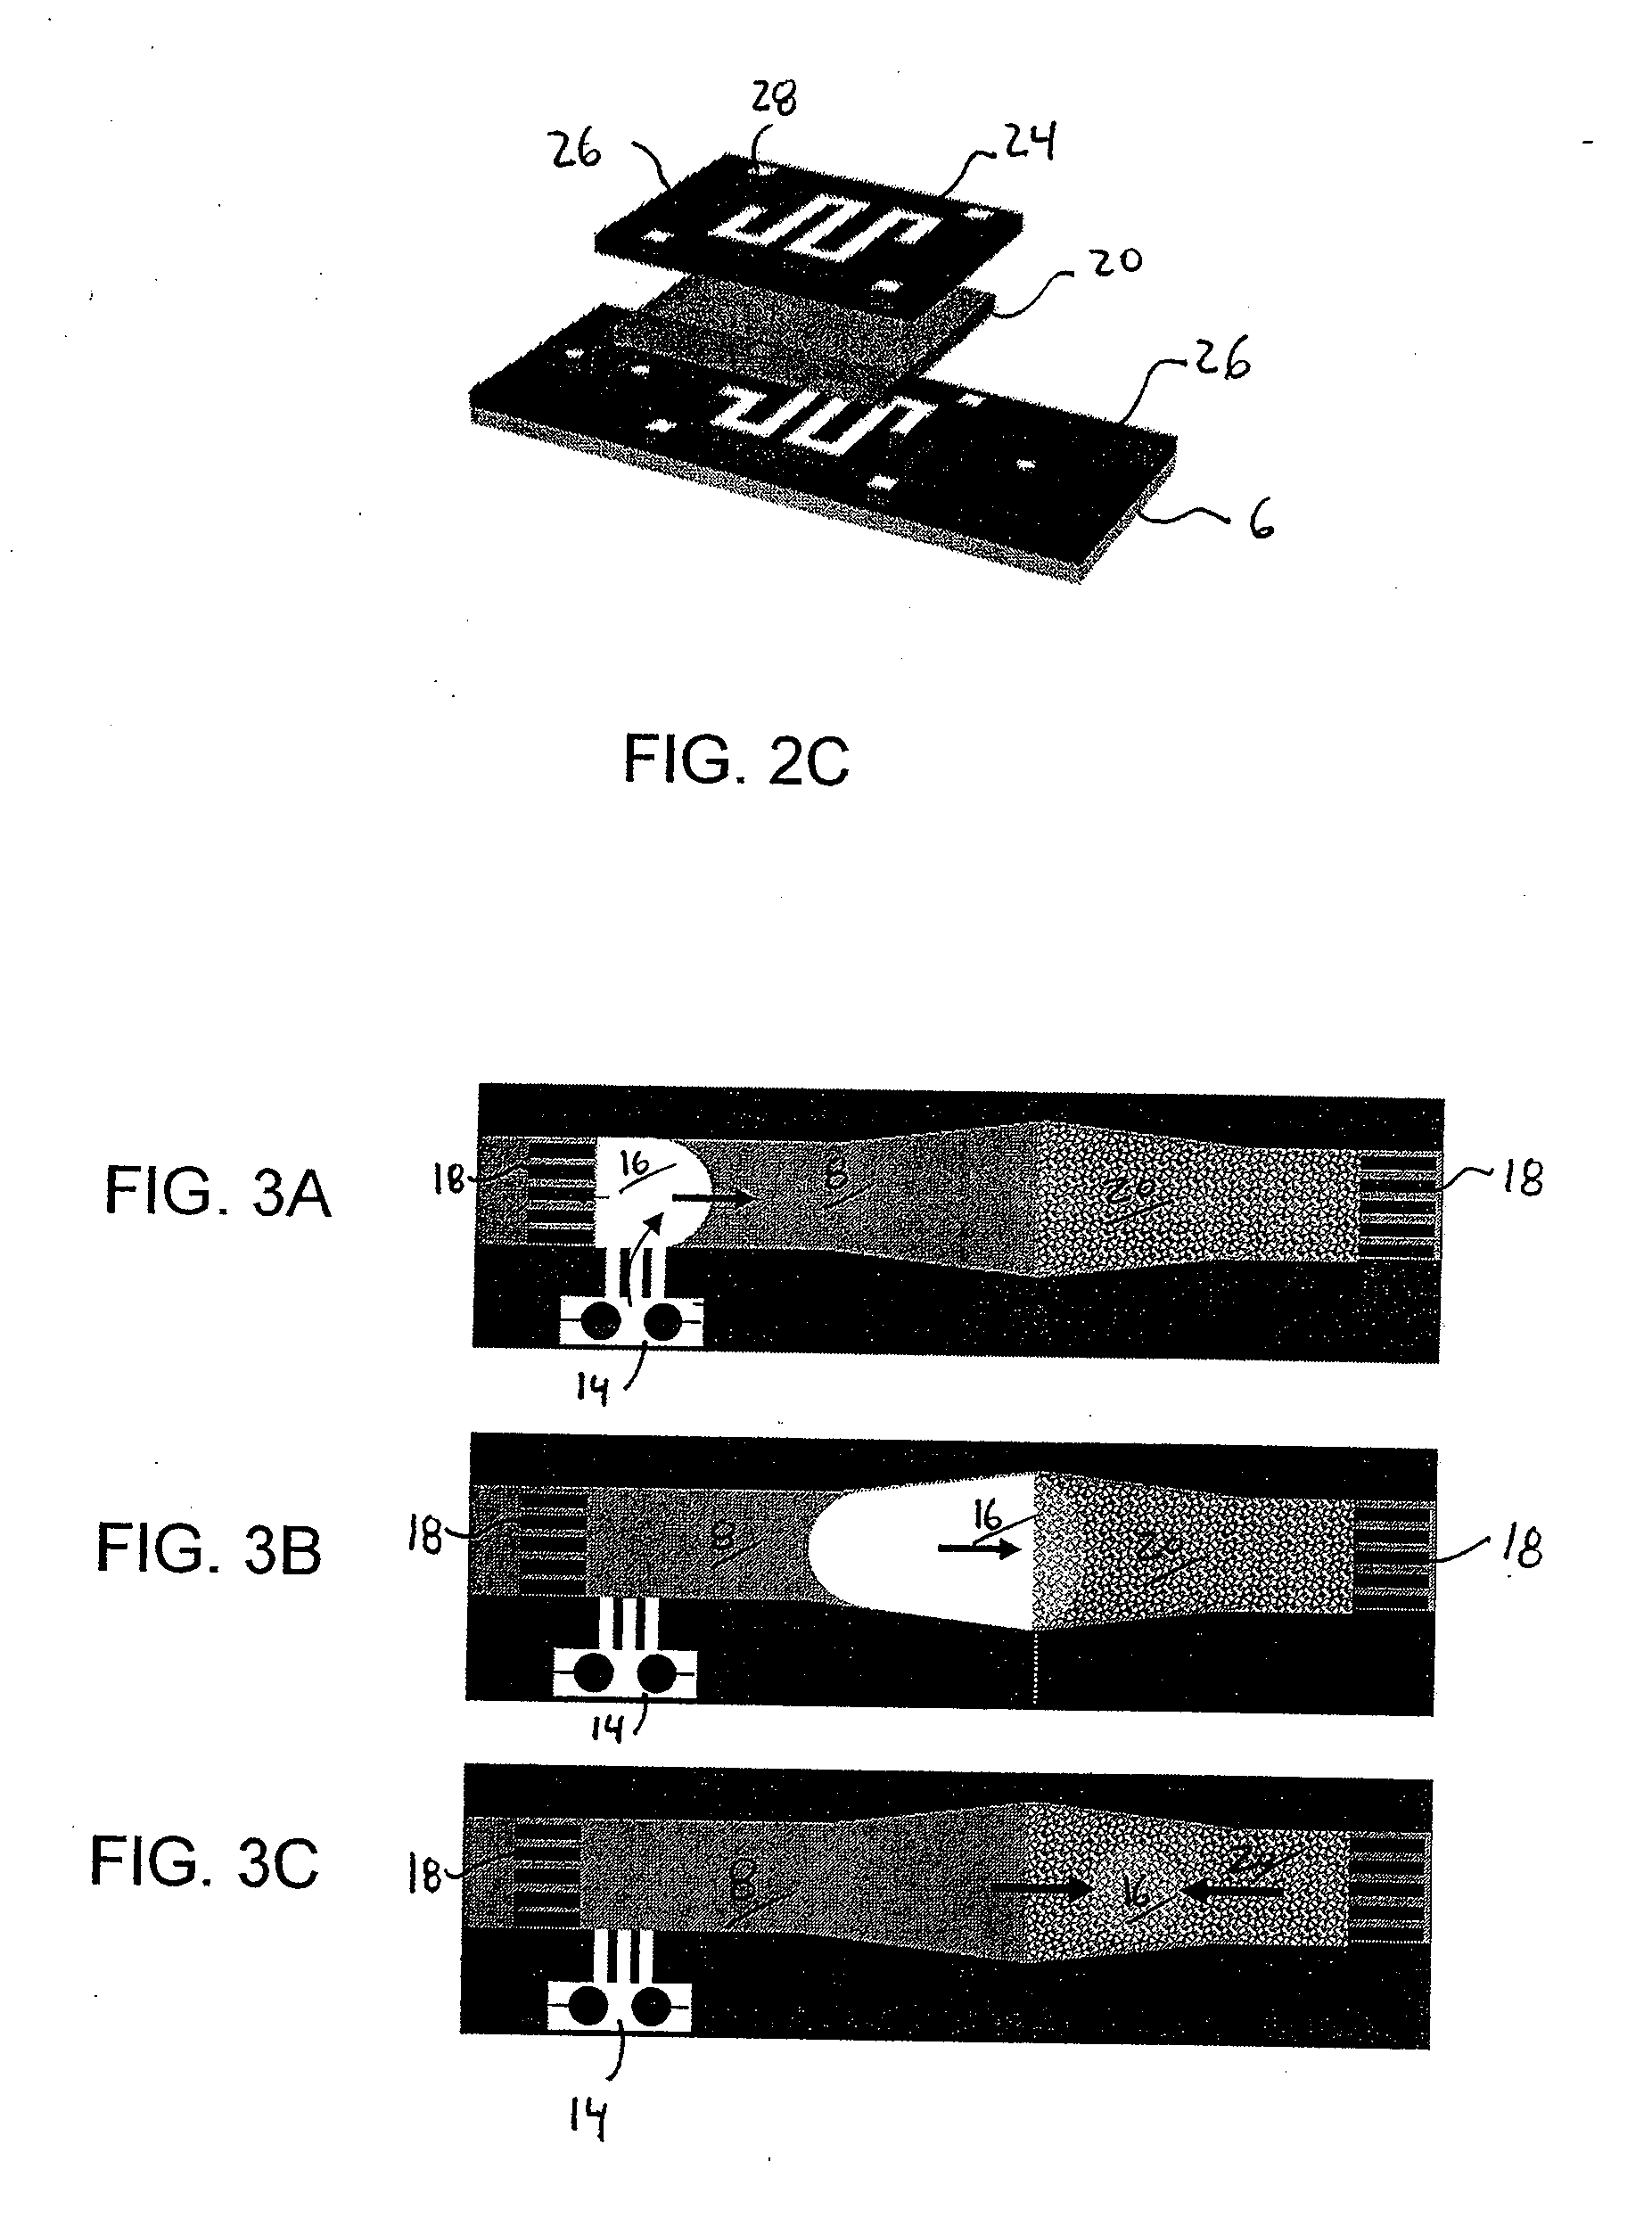 Method and Apparatus for Pumping Liquids Using Directional Growth and Elimination Bubbles